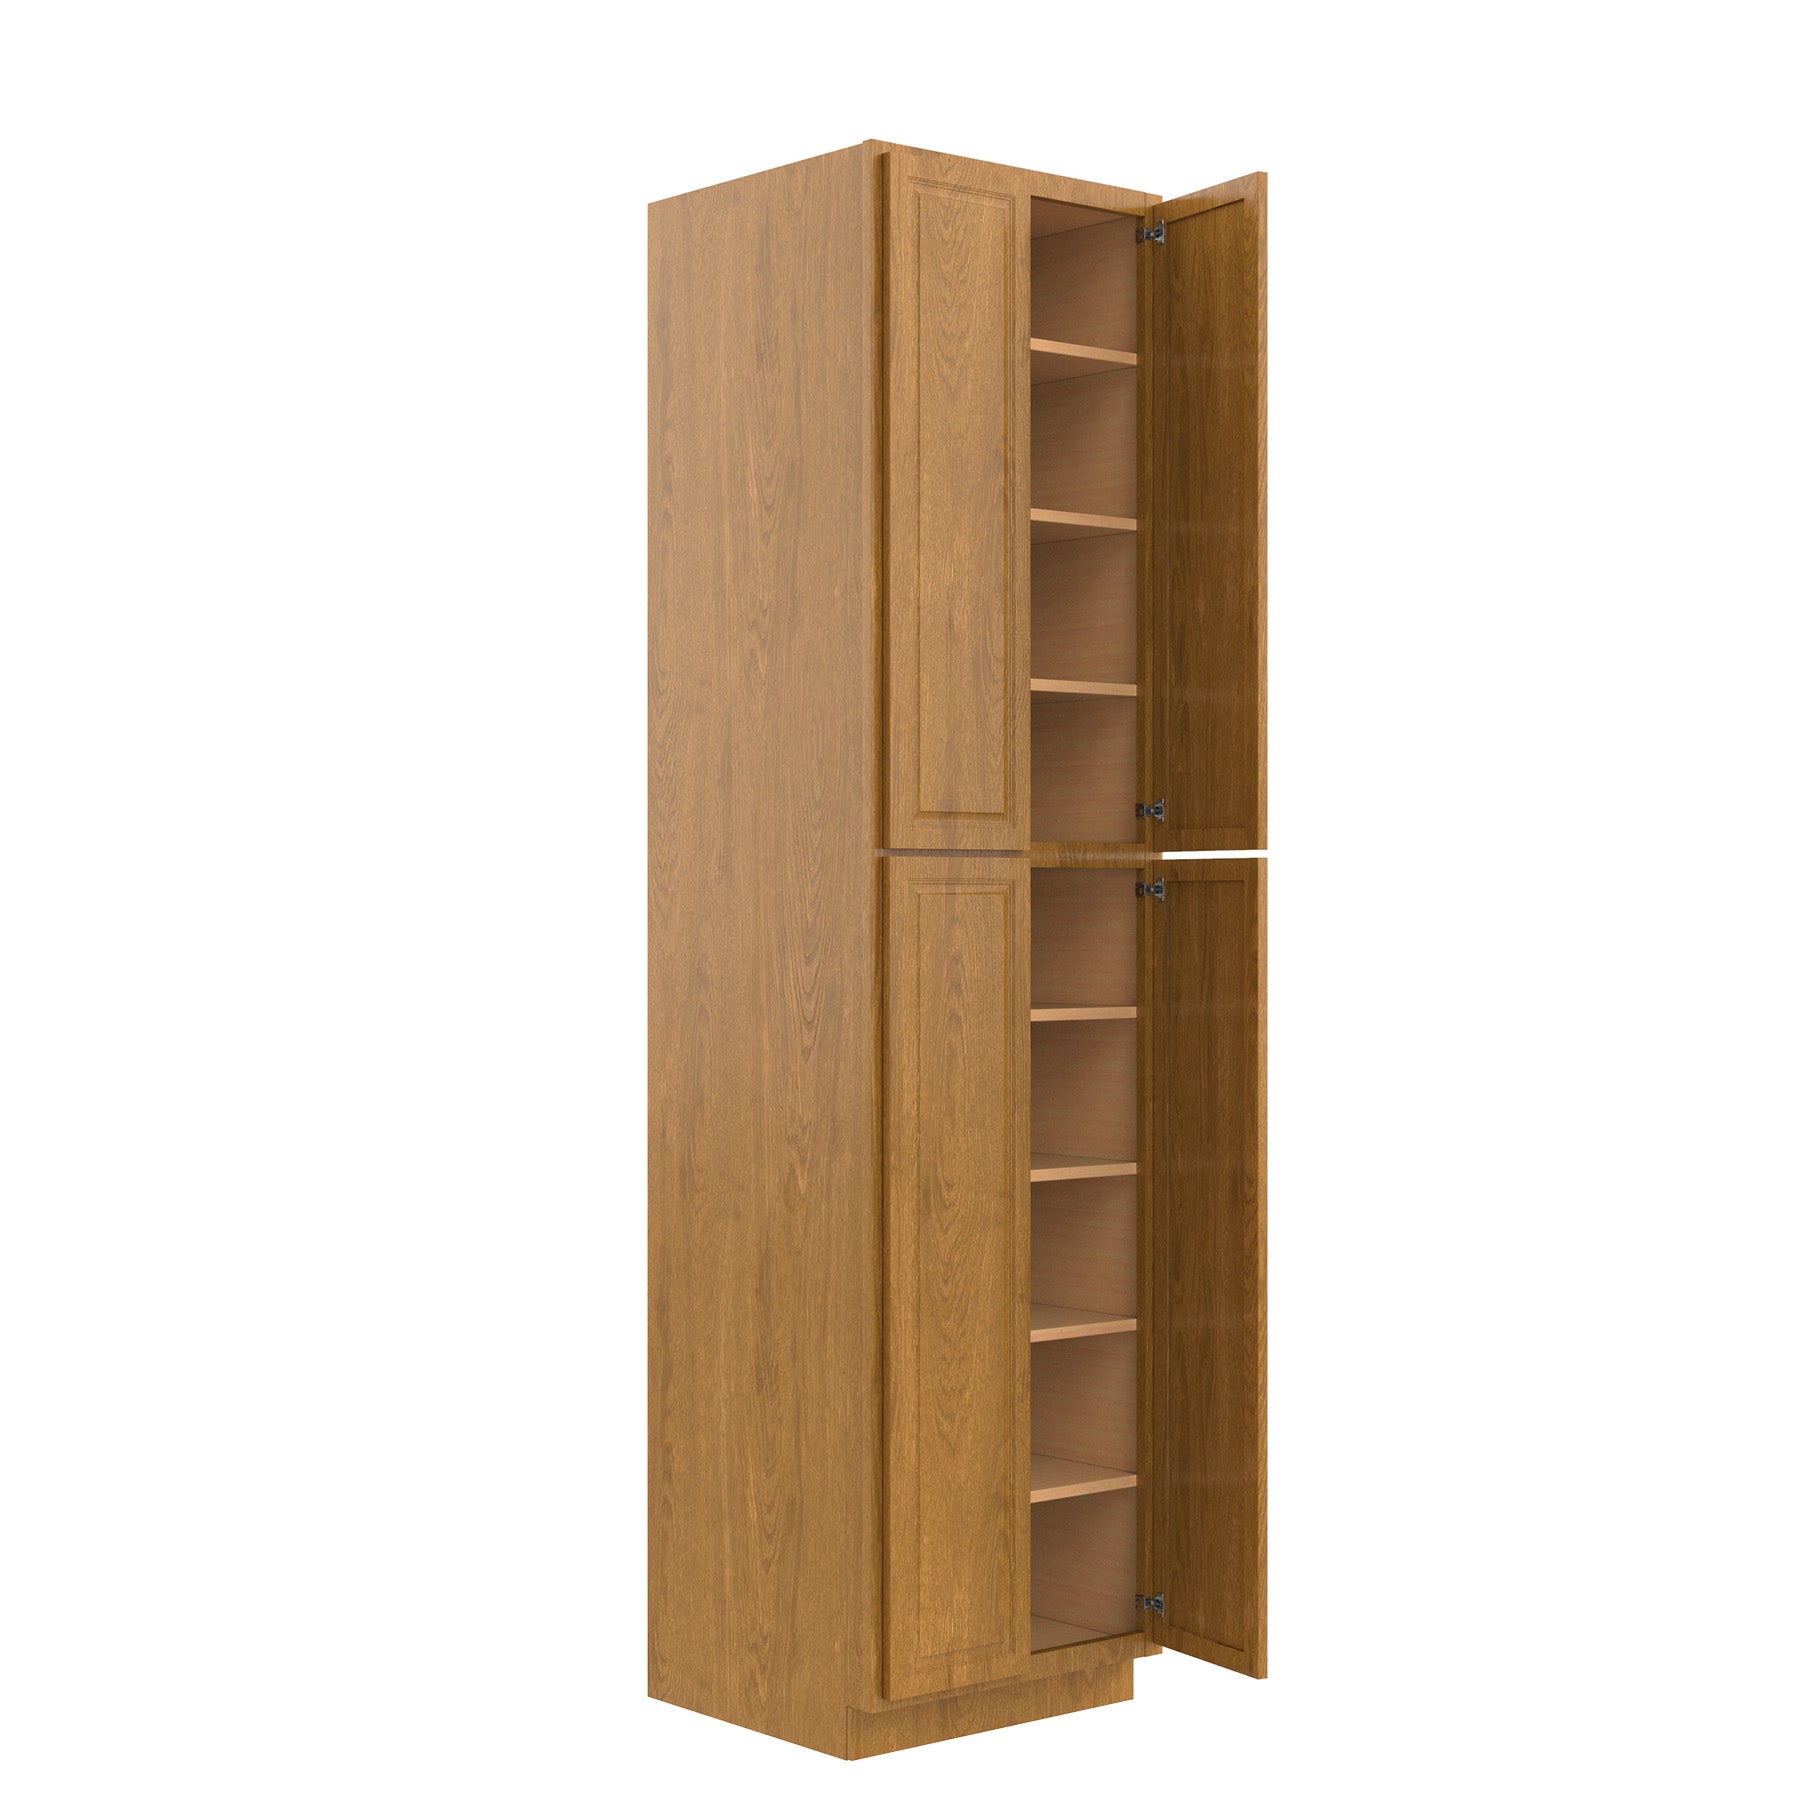 RTA - Country Oak - Double Door Tall Cabinet | 24"W x 96"H x 24"D